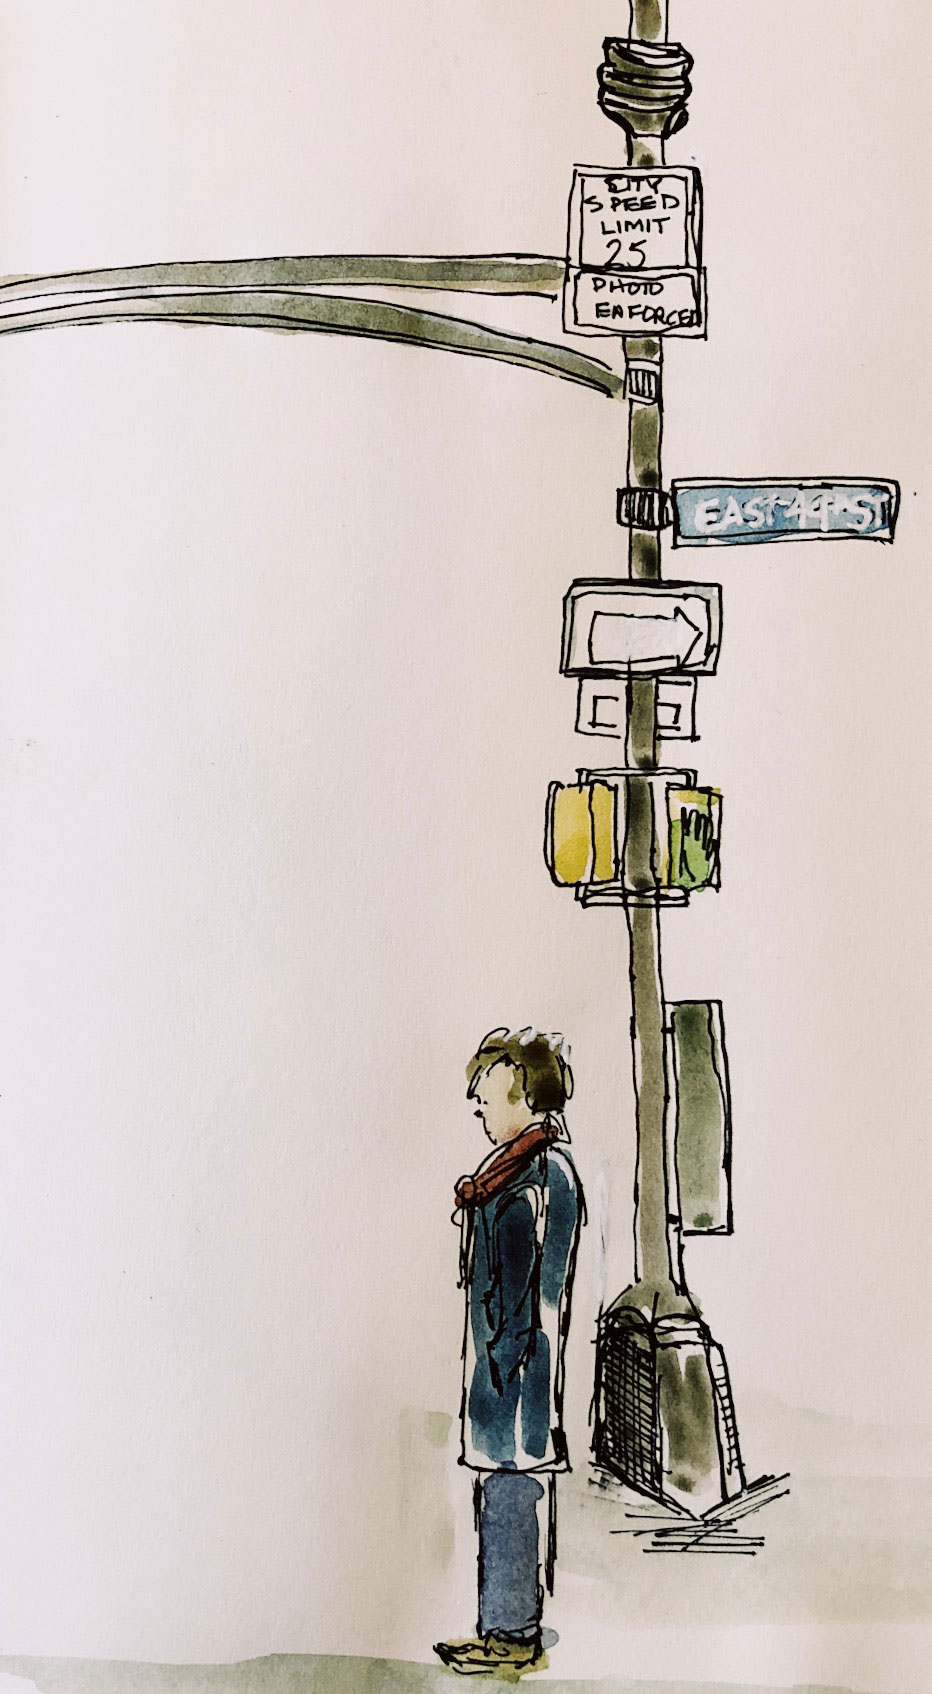 Urban watercolor sketch of a man on 49th ST. in New York City